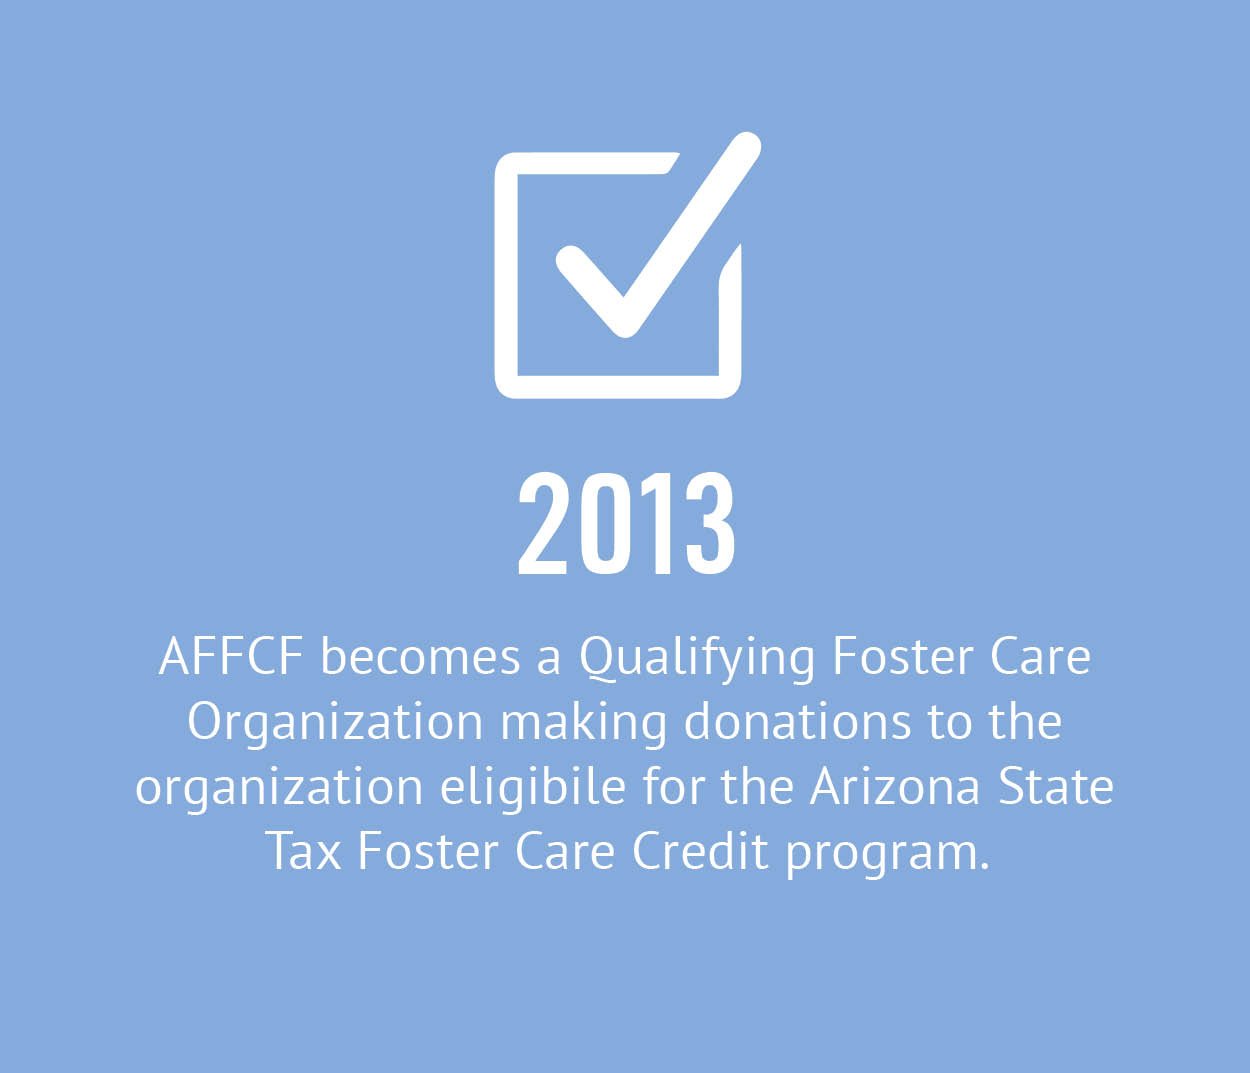 2013 - AFFCF becomes a Qualifying Foster Care Organization making donations to the organization eligible for the Arizona State Tax Foster Care Credit program.